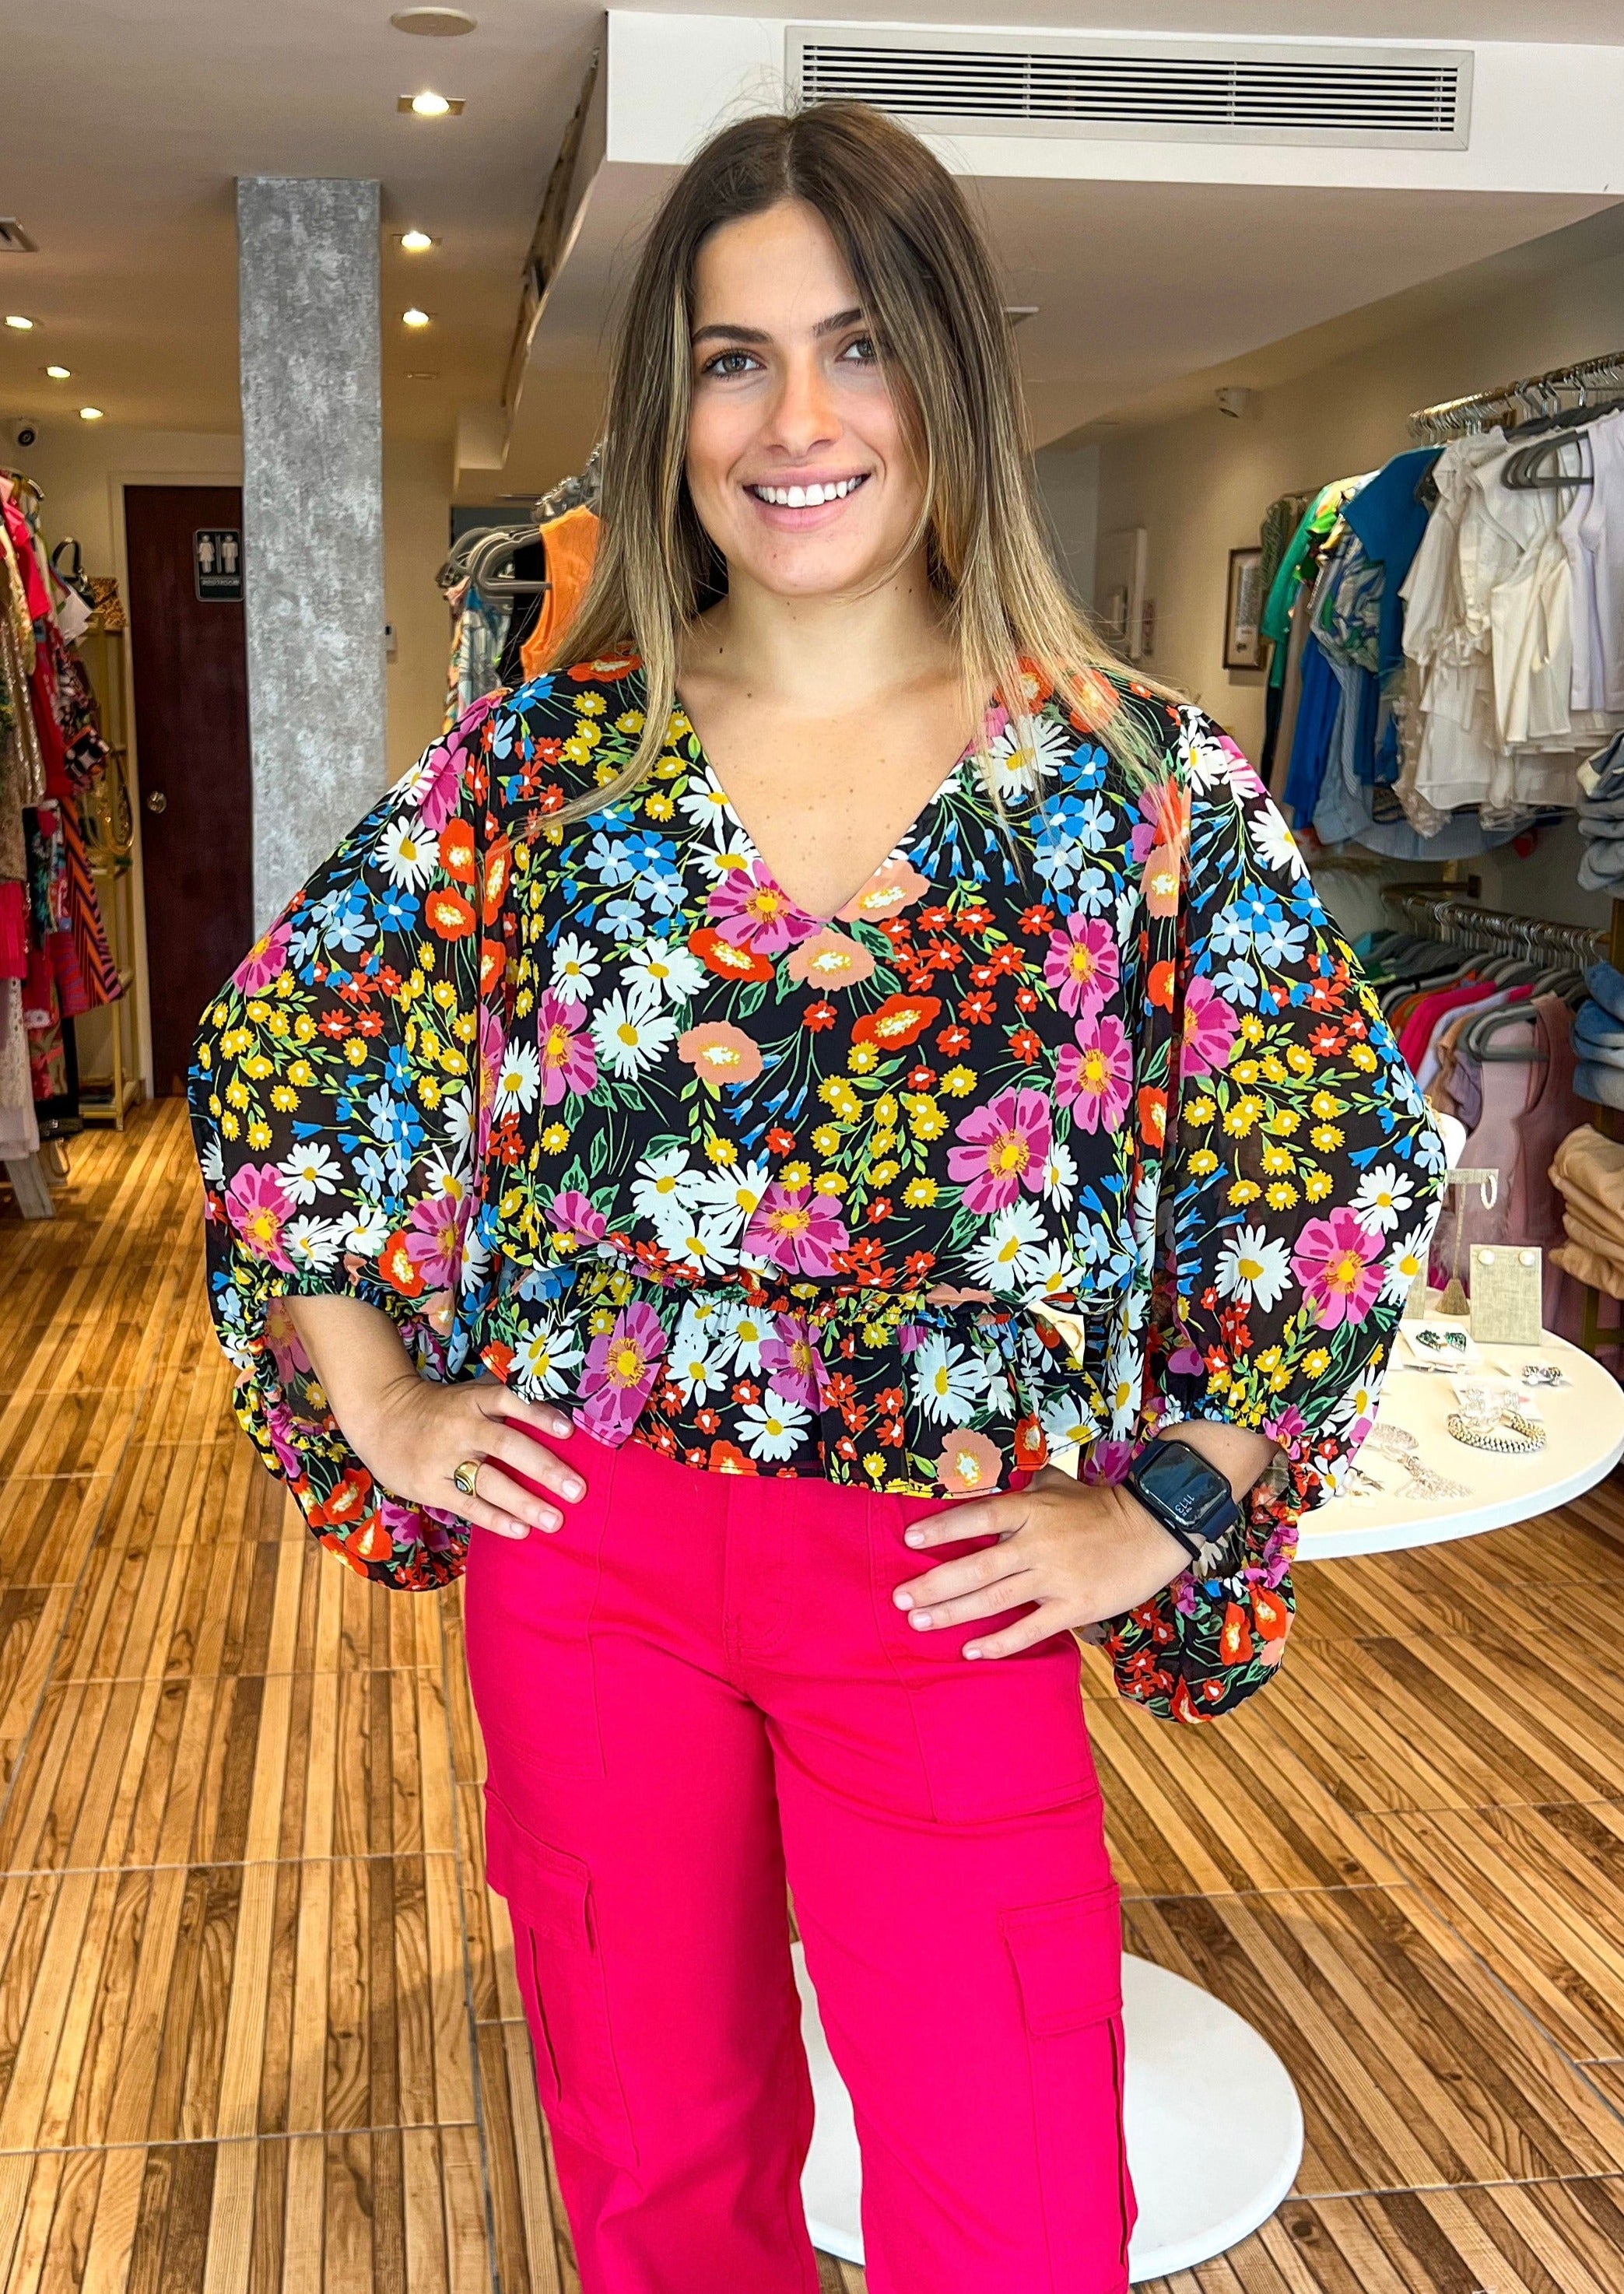 Beautiful and bold, the Lupita Floral print consists of various multicolored flowers against a blackground. The print shapes the evergreen blouse with roomy full sleeves and a shallow V neckline. The bodice maintains a relaxed fit with an elastic waist to create a peplum silhouette. Wear it to work or out to brunch along with black trousers and cute strappy heels.